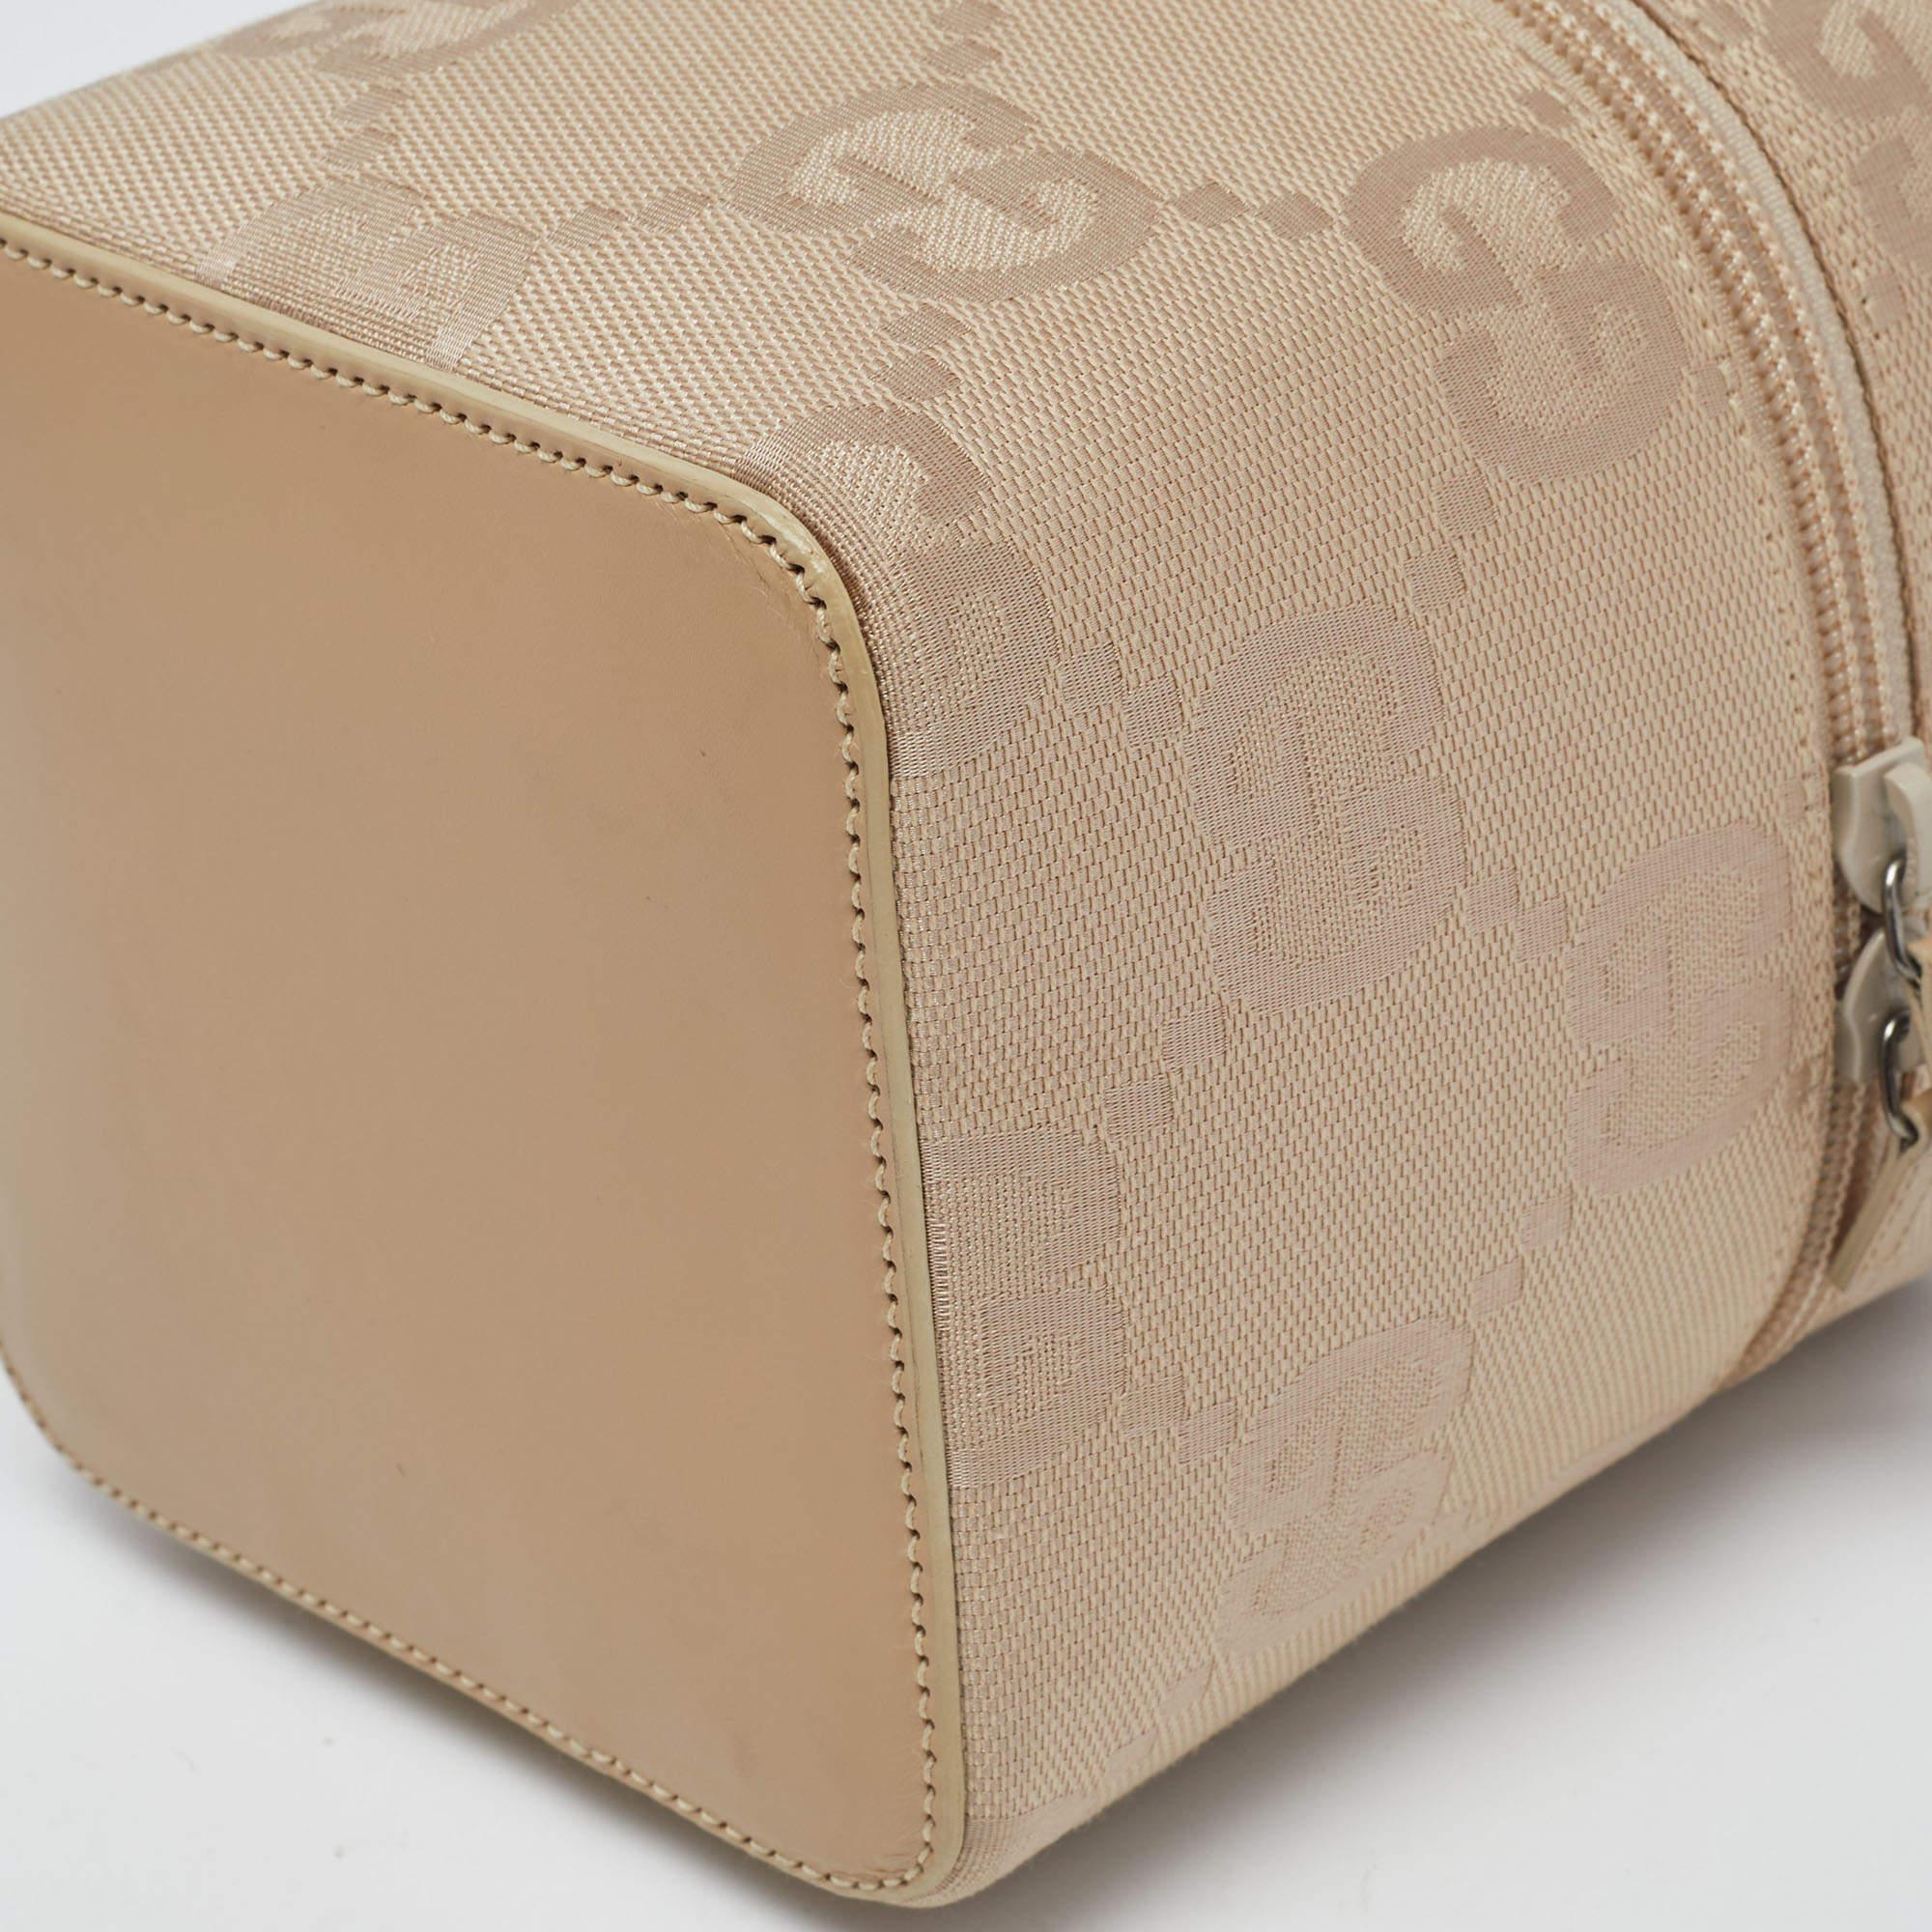 Gucci Beige GG Canvas and Leather Vanity Bag 2